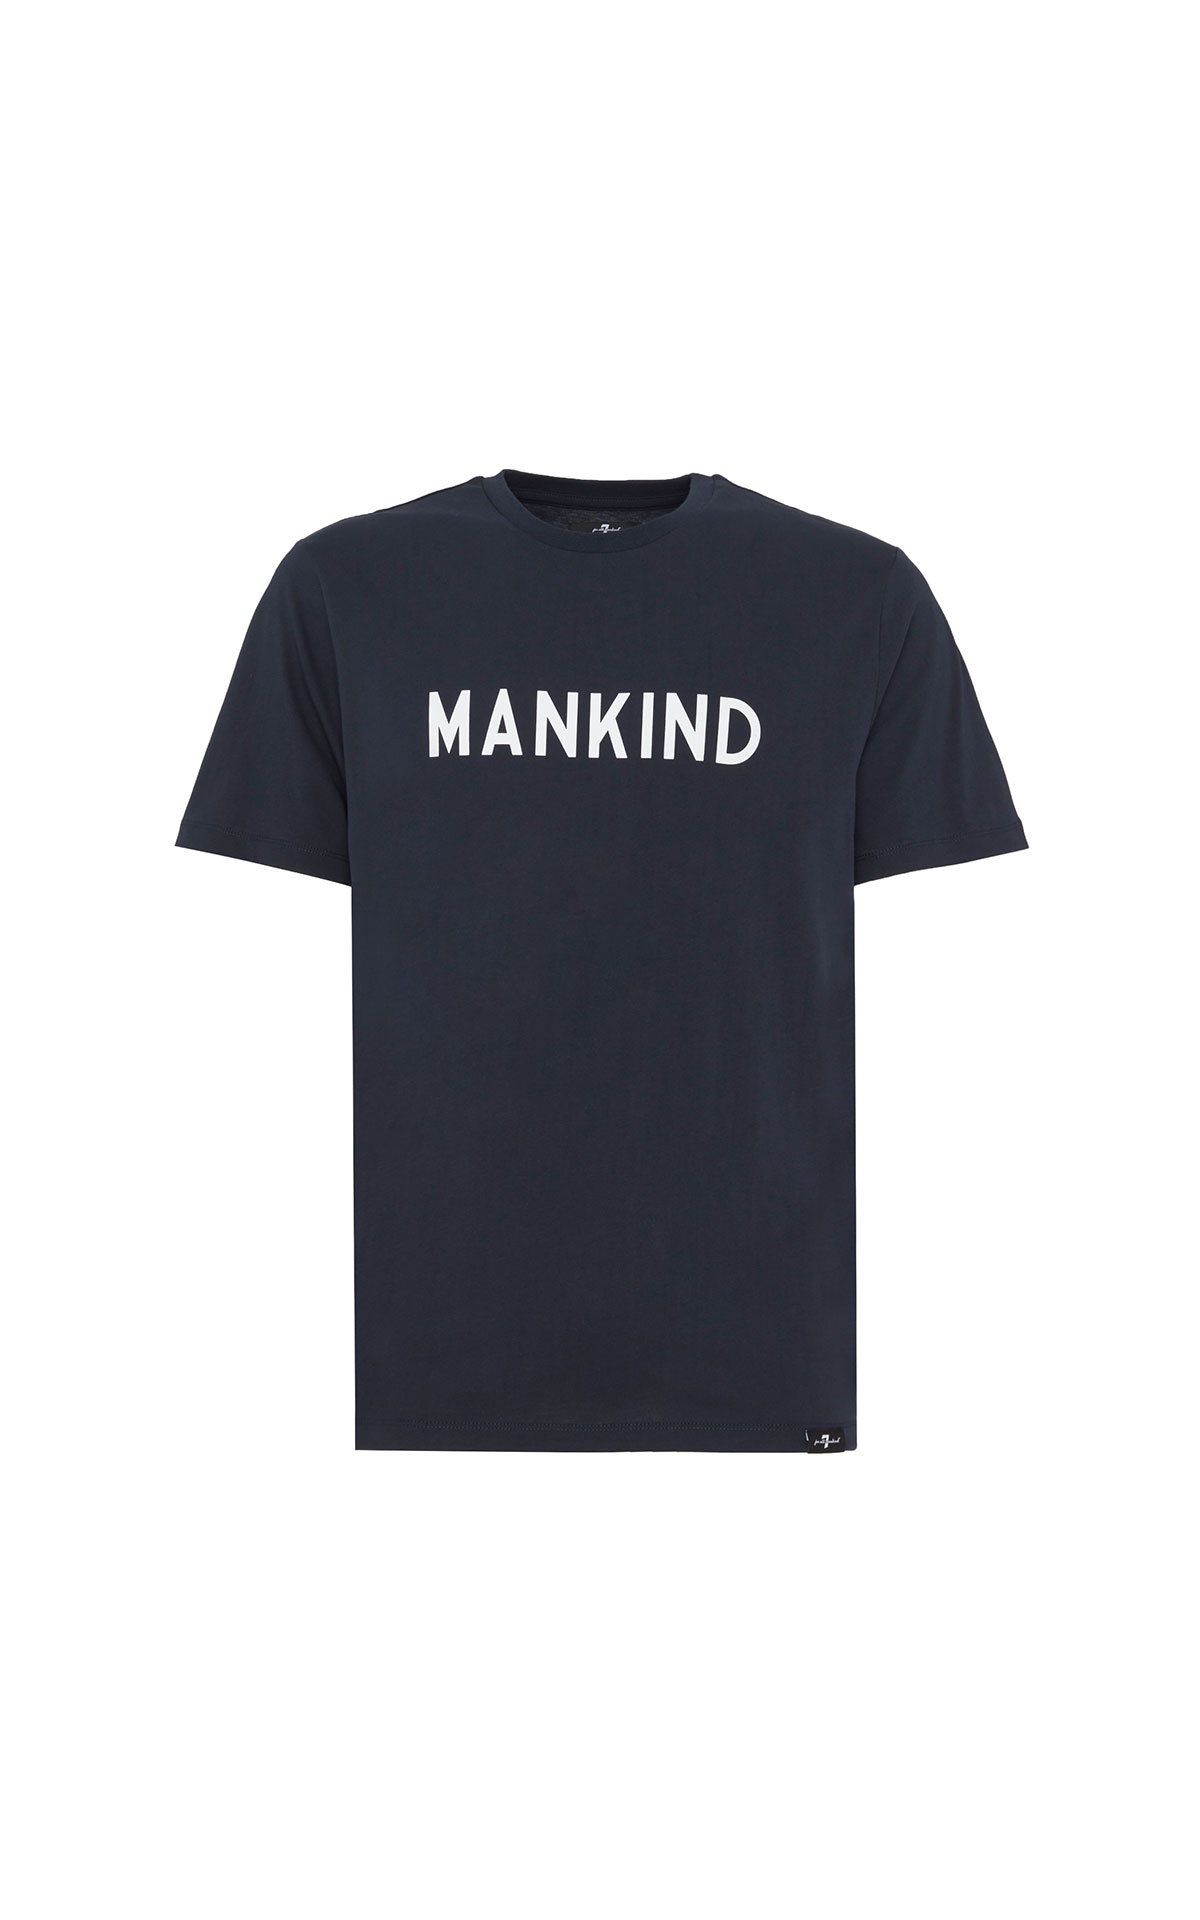 7 For all Mankind Logo tee jersey from Bicester Village